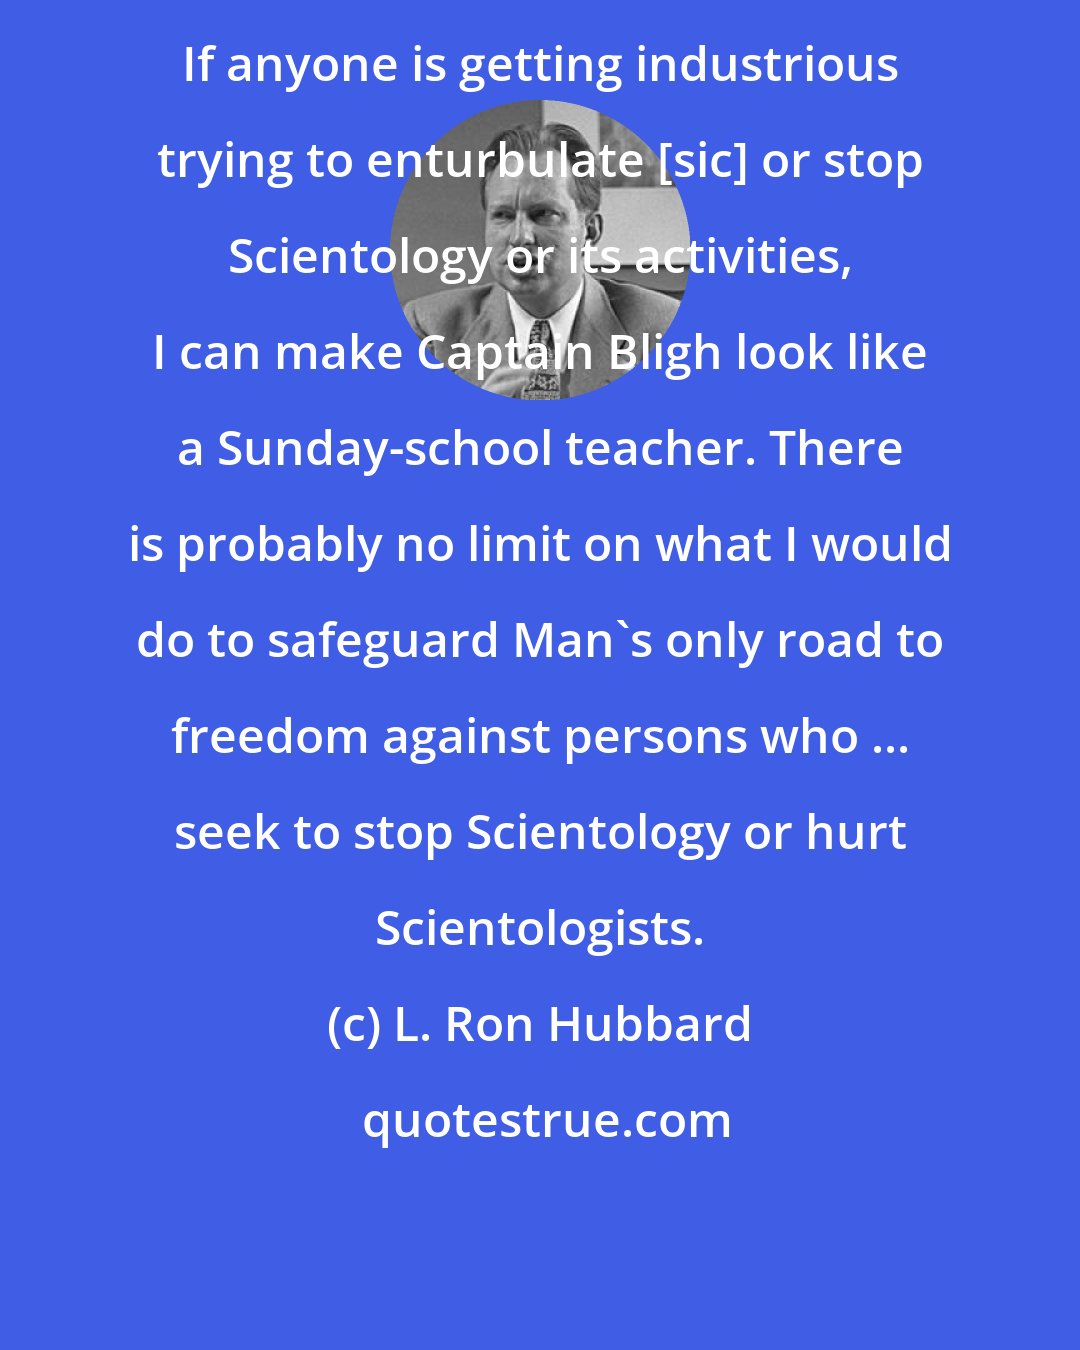 L. Ron Hubbard: If anyone is getting industrious trying to enturbulate [sic] or stop Scientology or its activities, I can make Captain Bligh look like a Sunday-school teacher. There is probably no limit on what I would do to safeguard Man's only road to freedom against persons who ... seek to stop Scientology or hurt Scientologists.